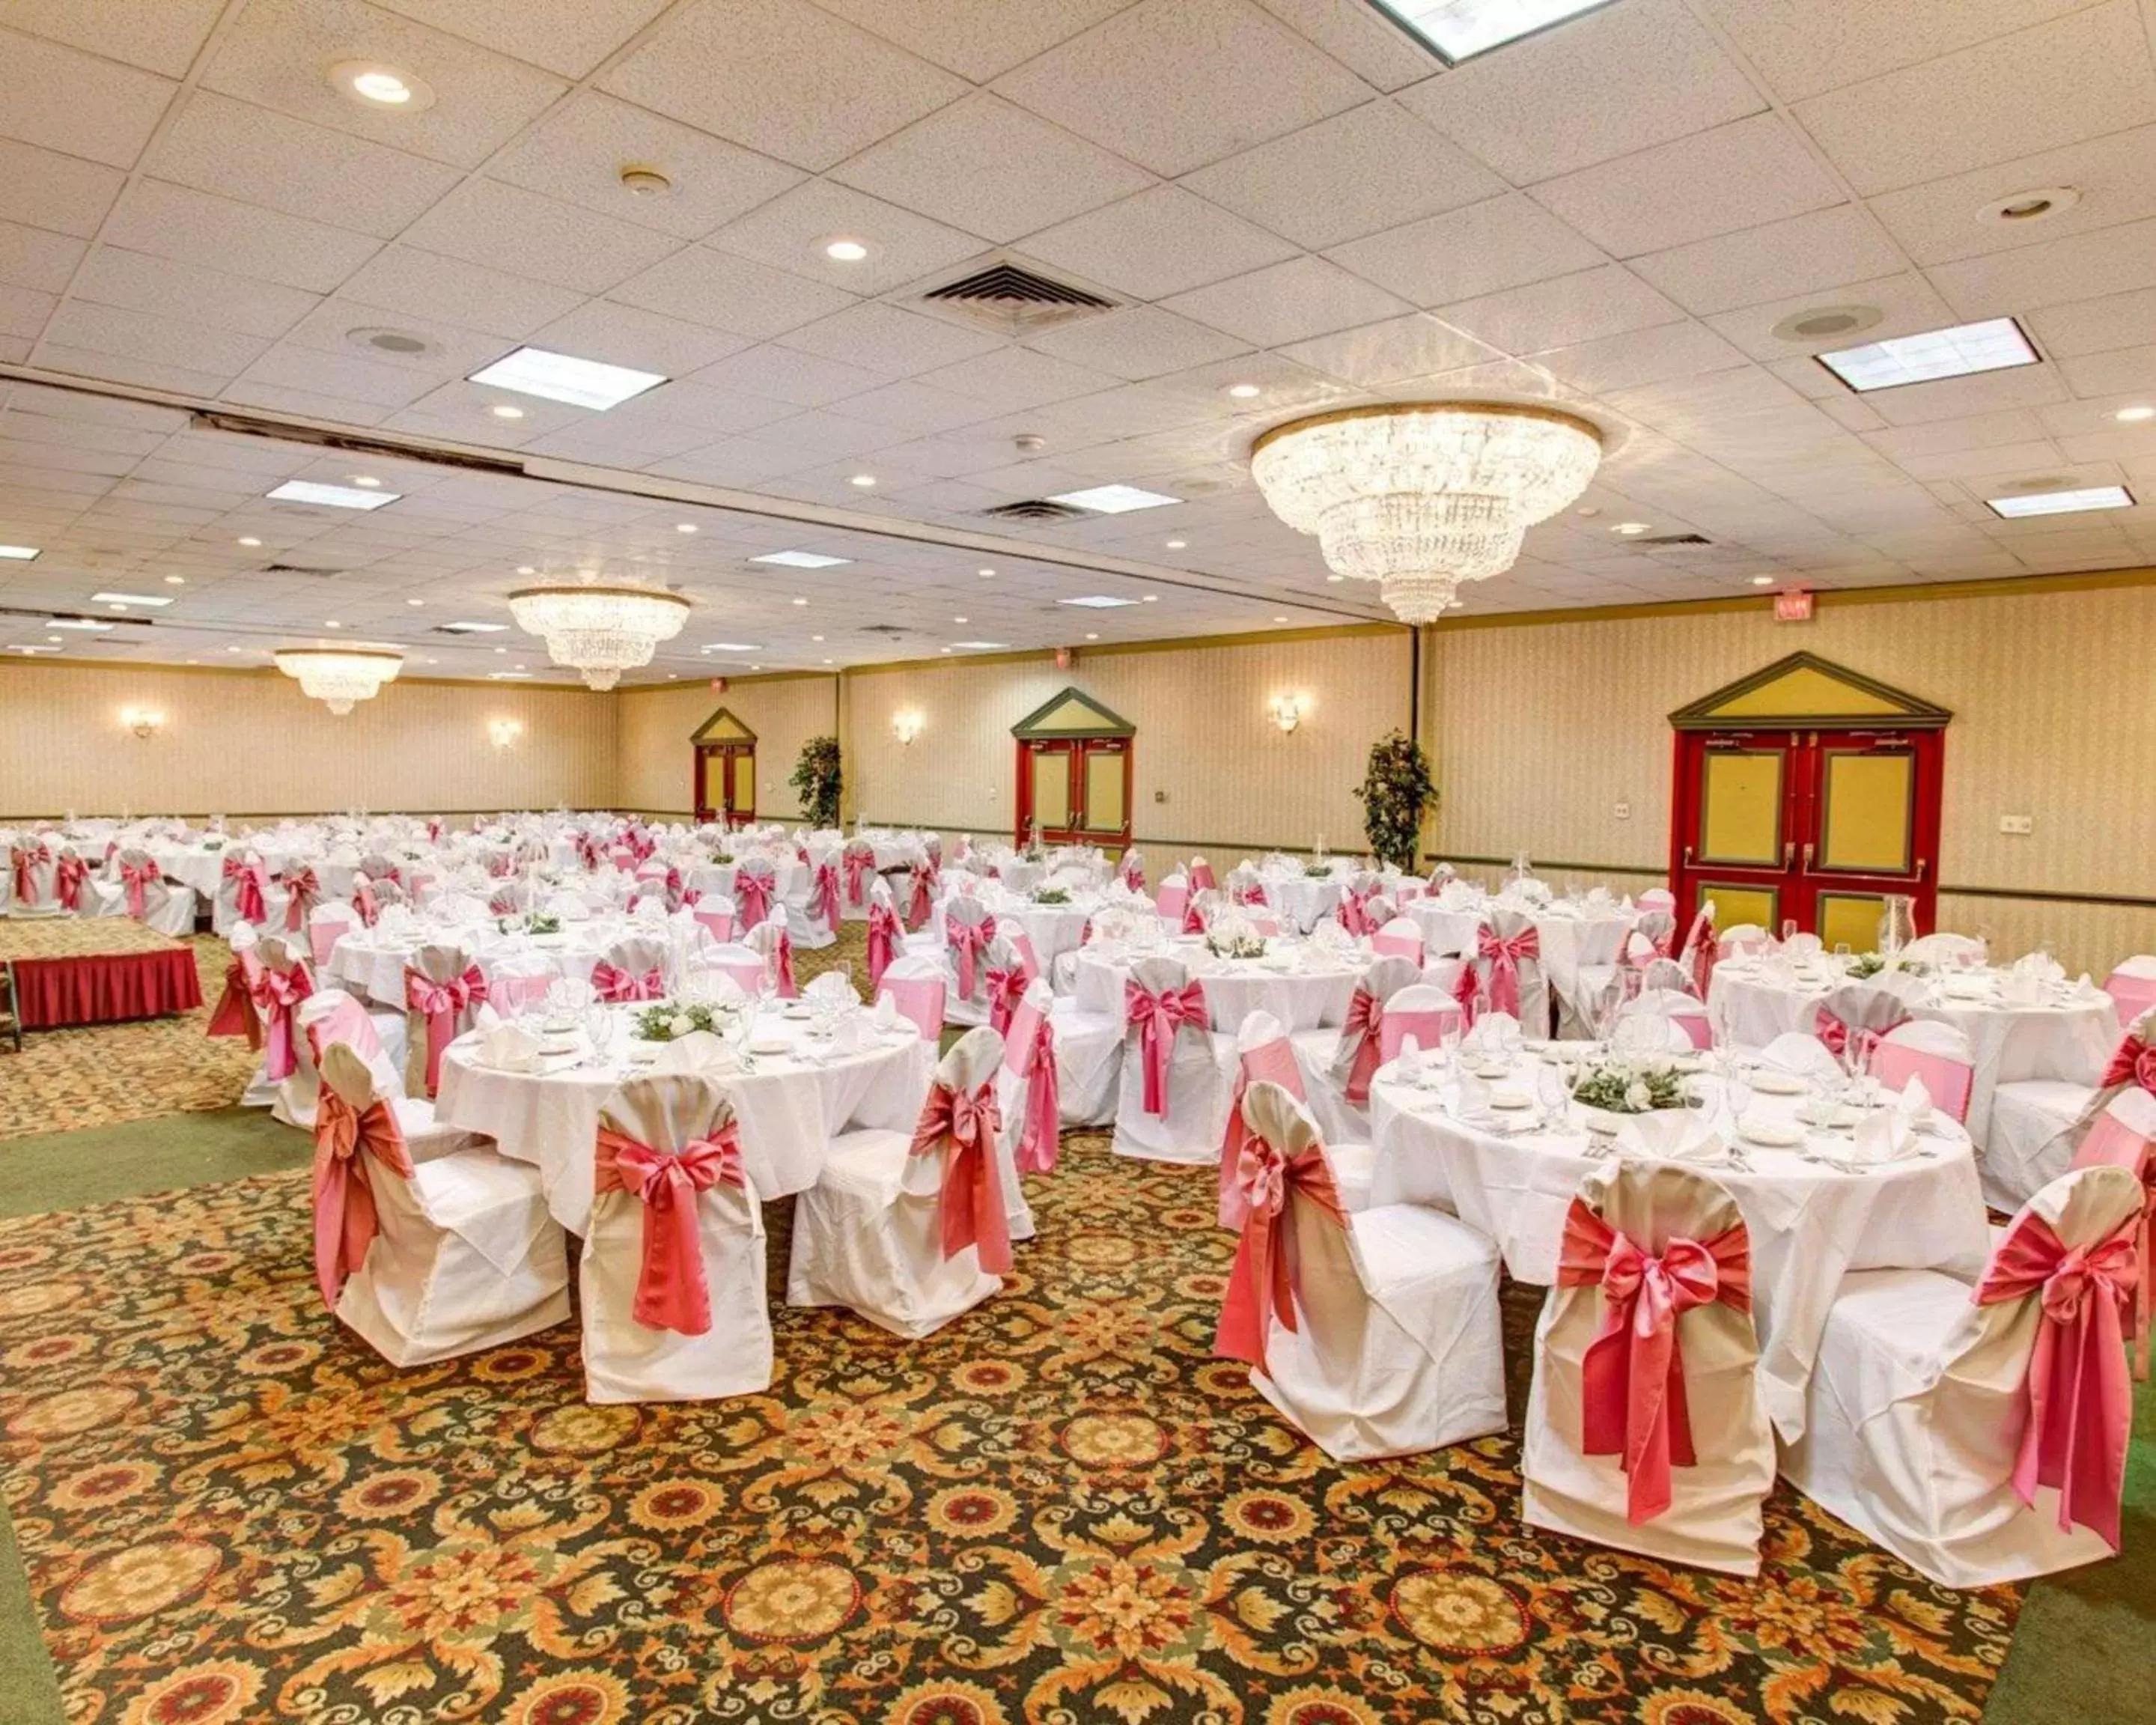 On site, Banquet Facilities in Comfort Inn Conference Center Pittsburgh